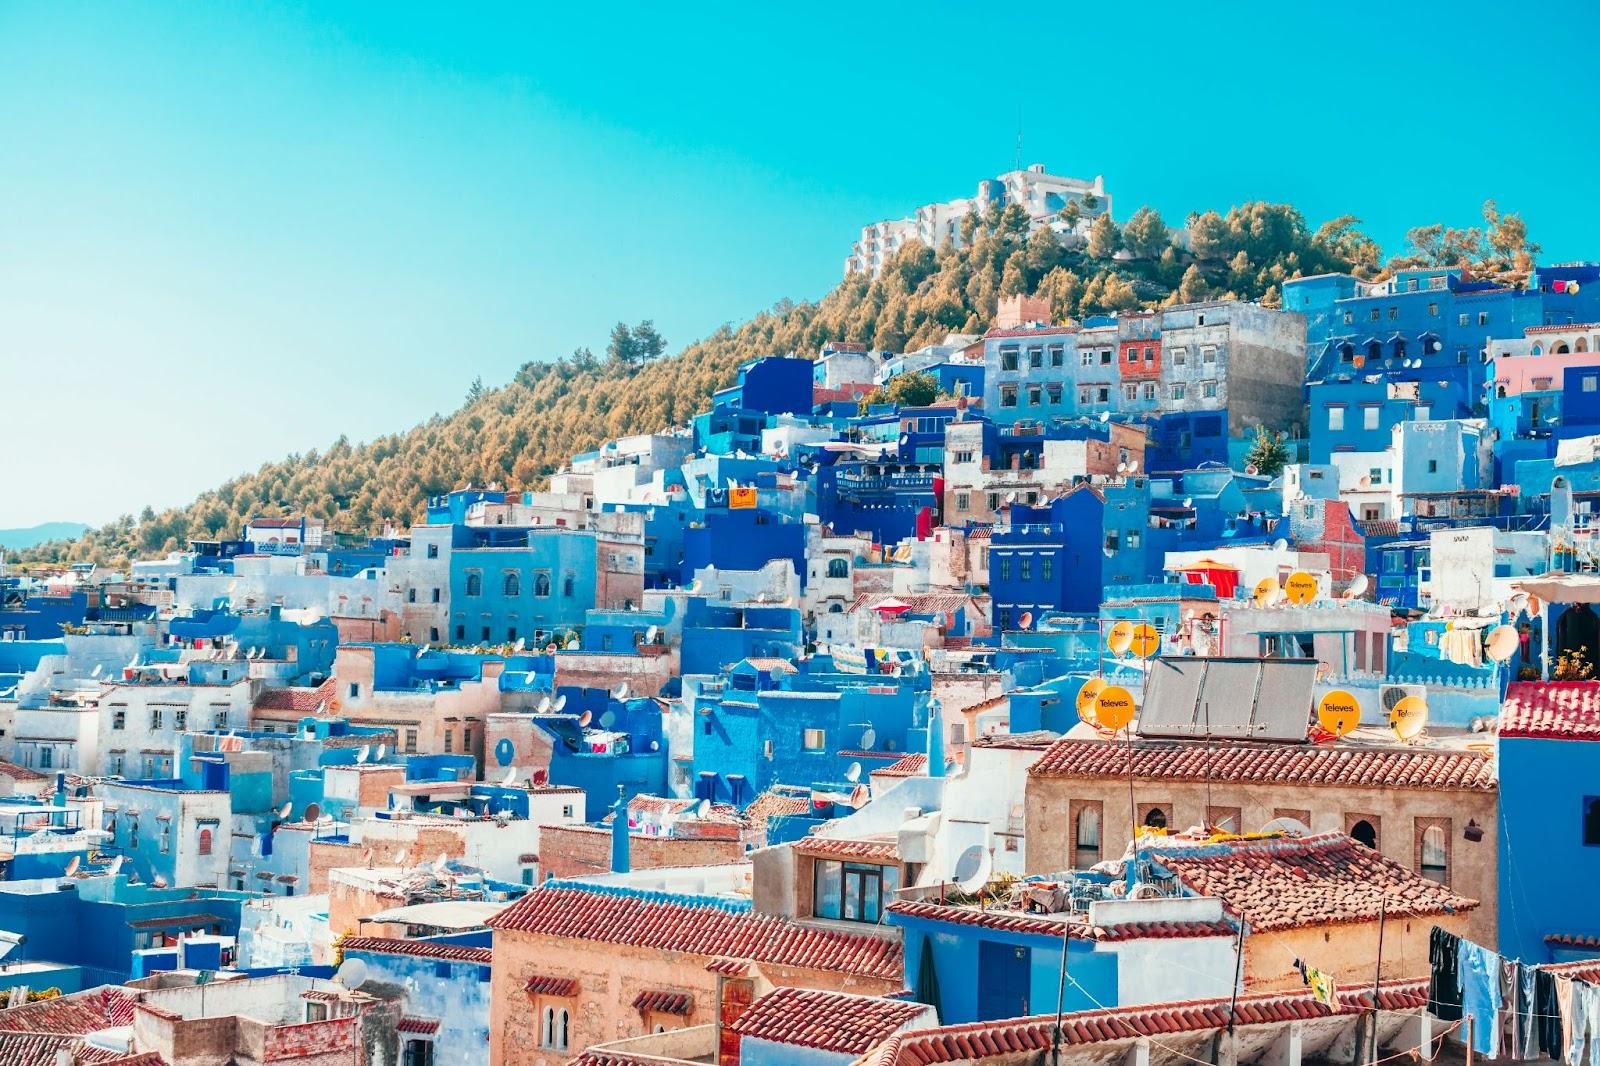 The city of blue. Chefchaouen